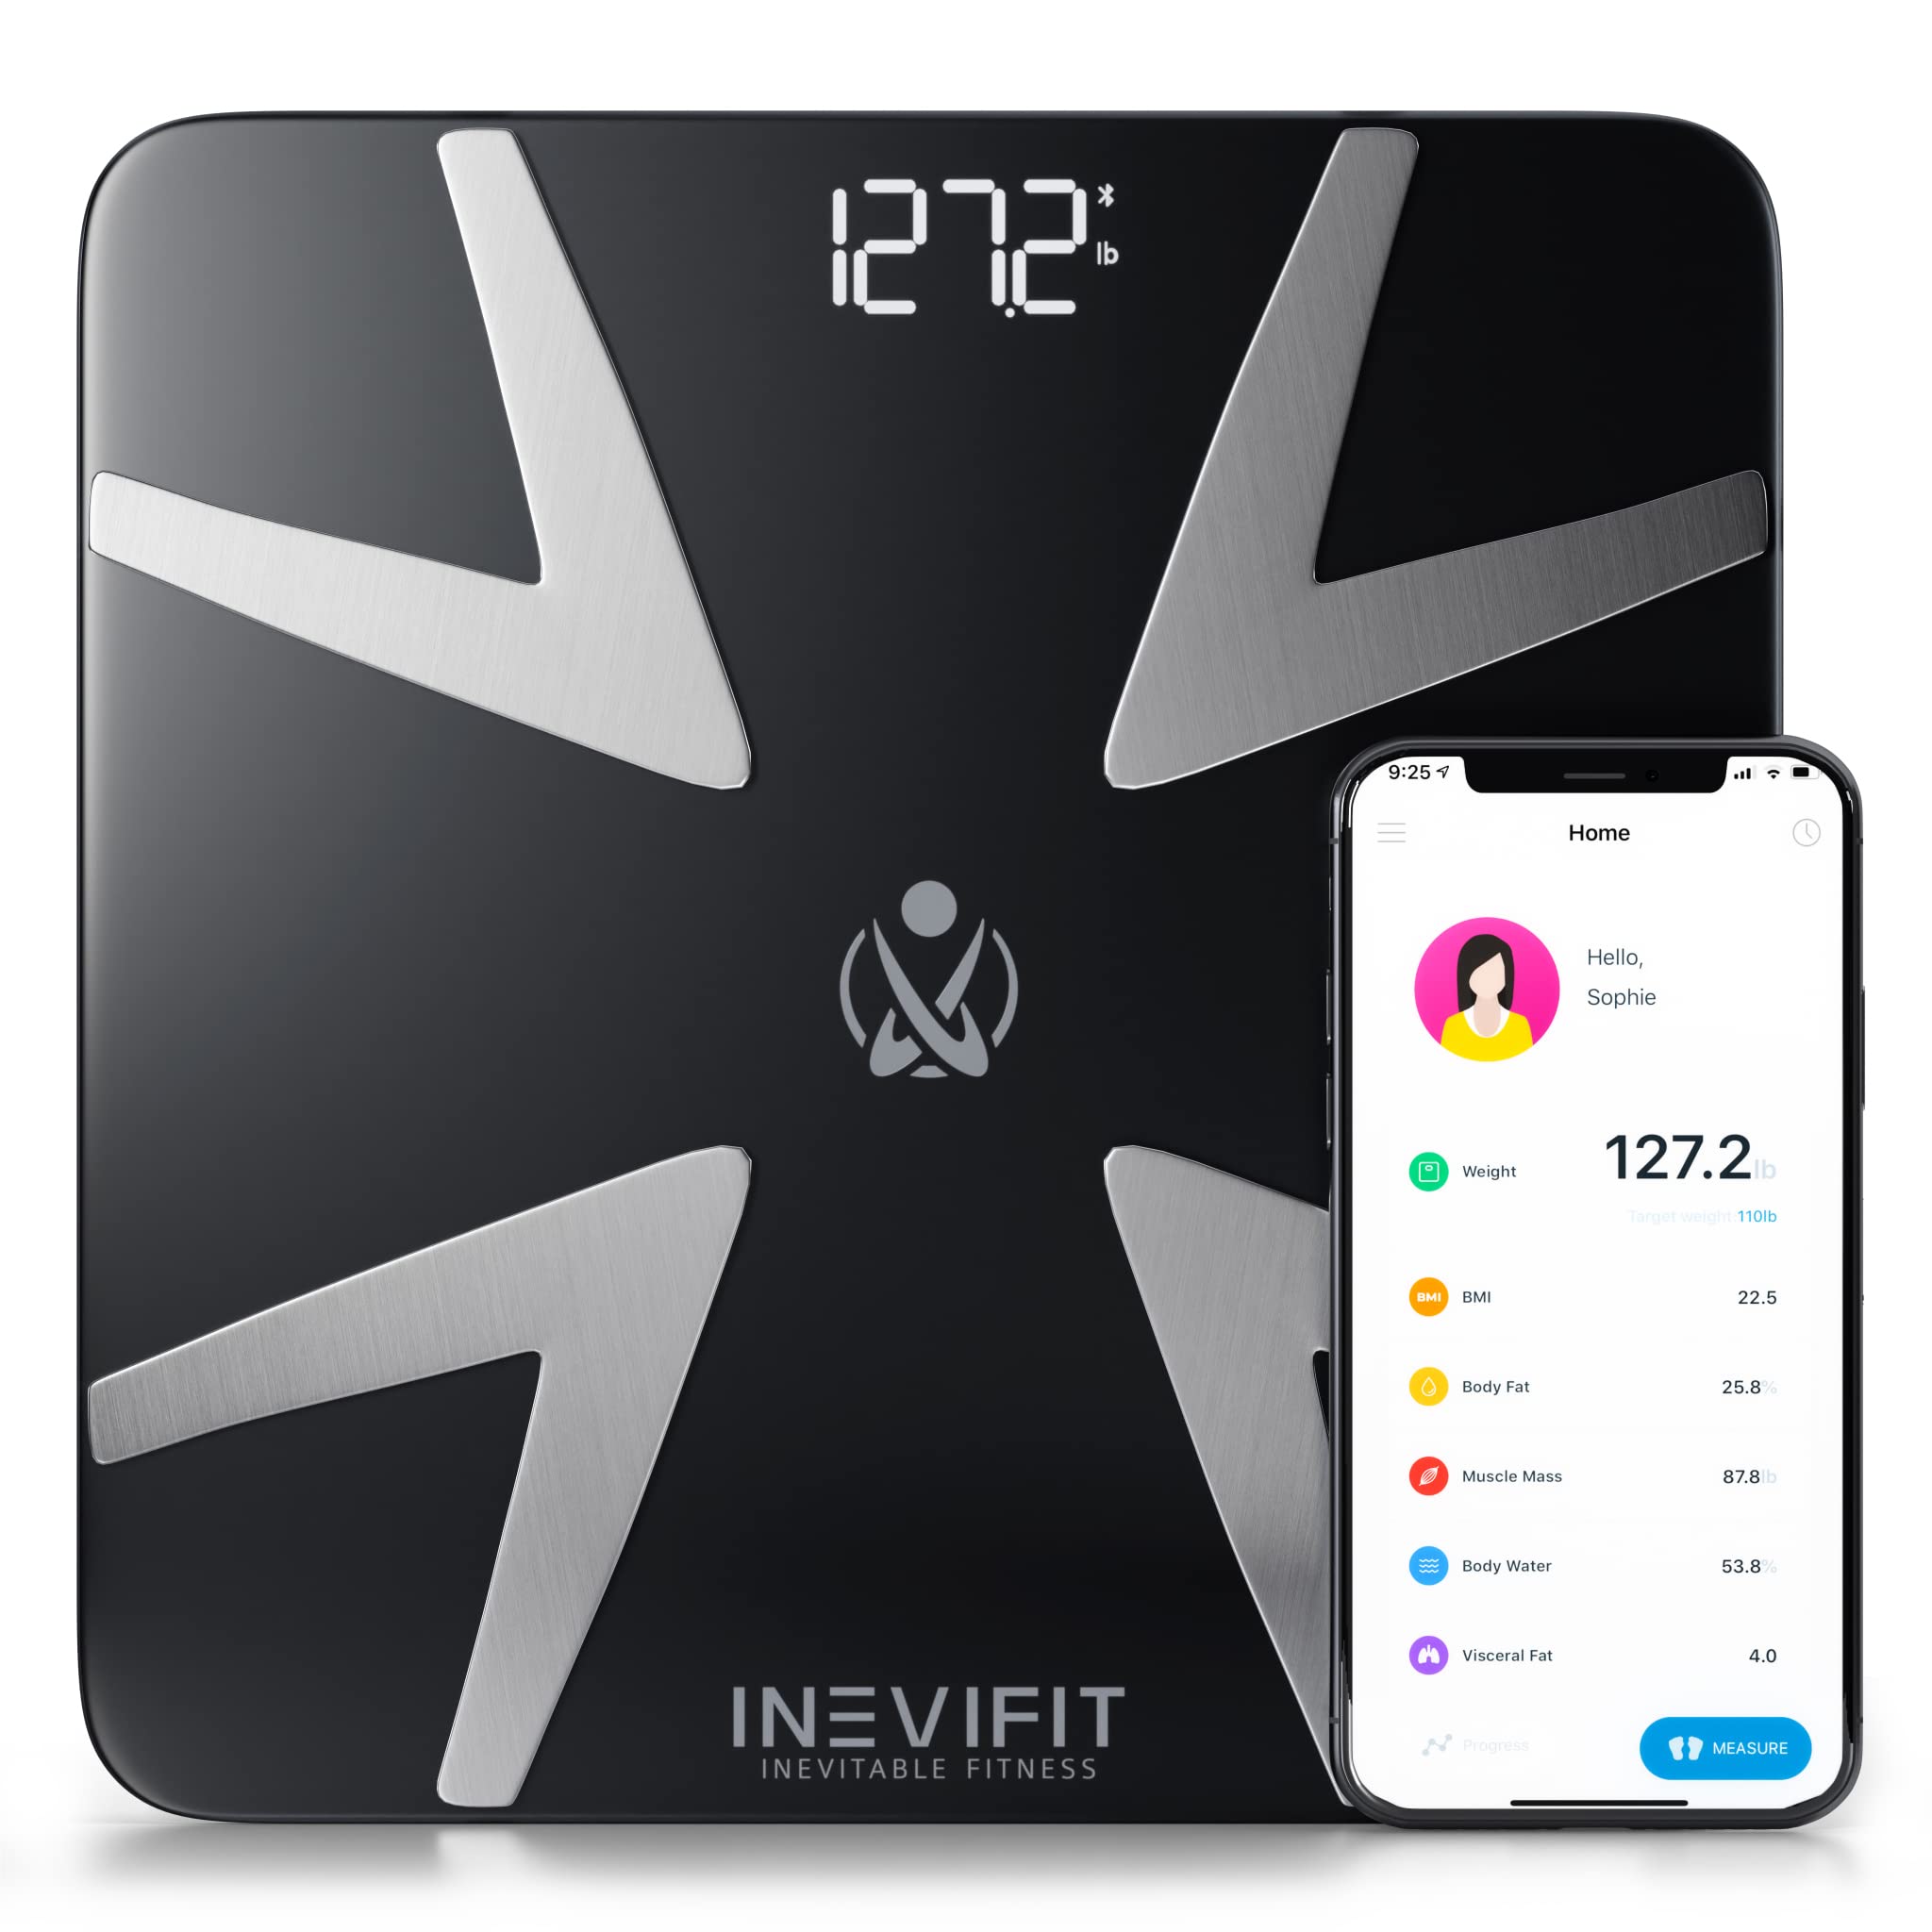 INEVIFIT BATHROOM SCALE, Highly Accurate Digital Bathroom Body Scale,  Measures Weight for Multiple Users 